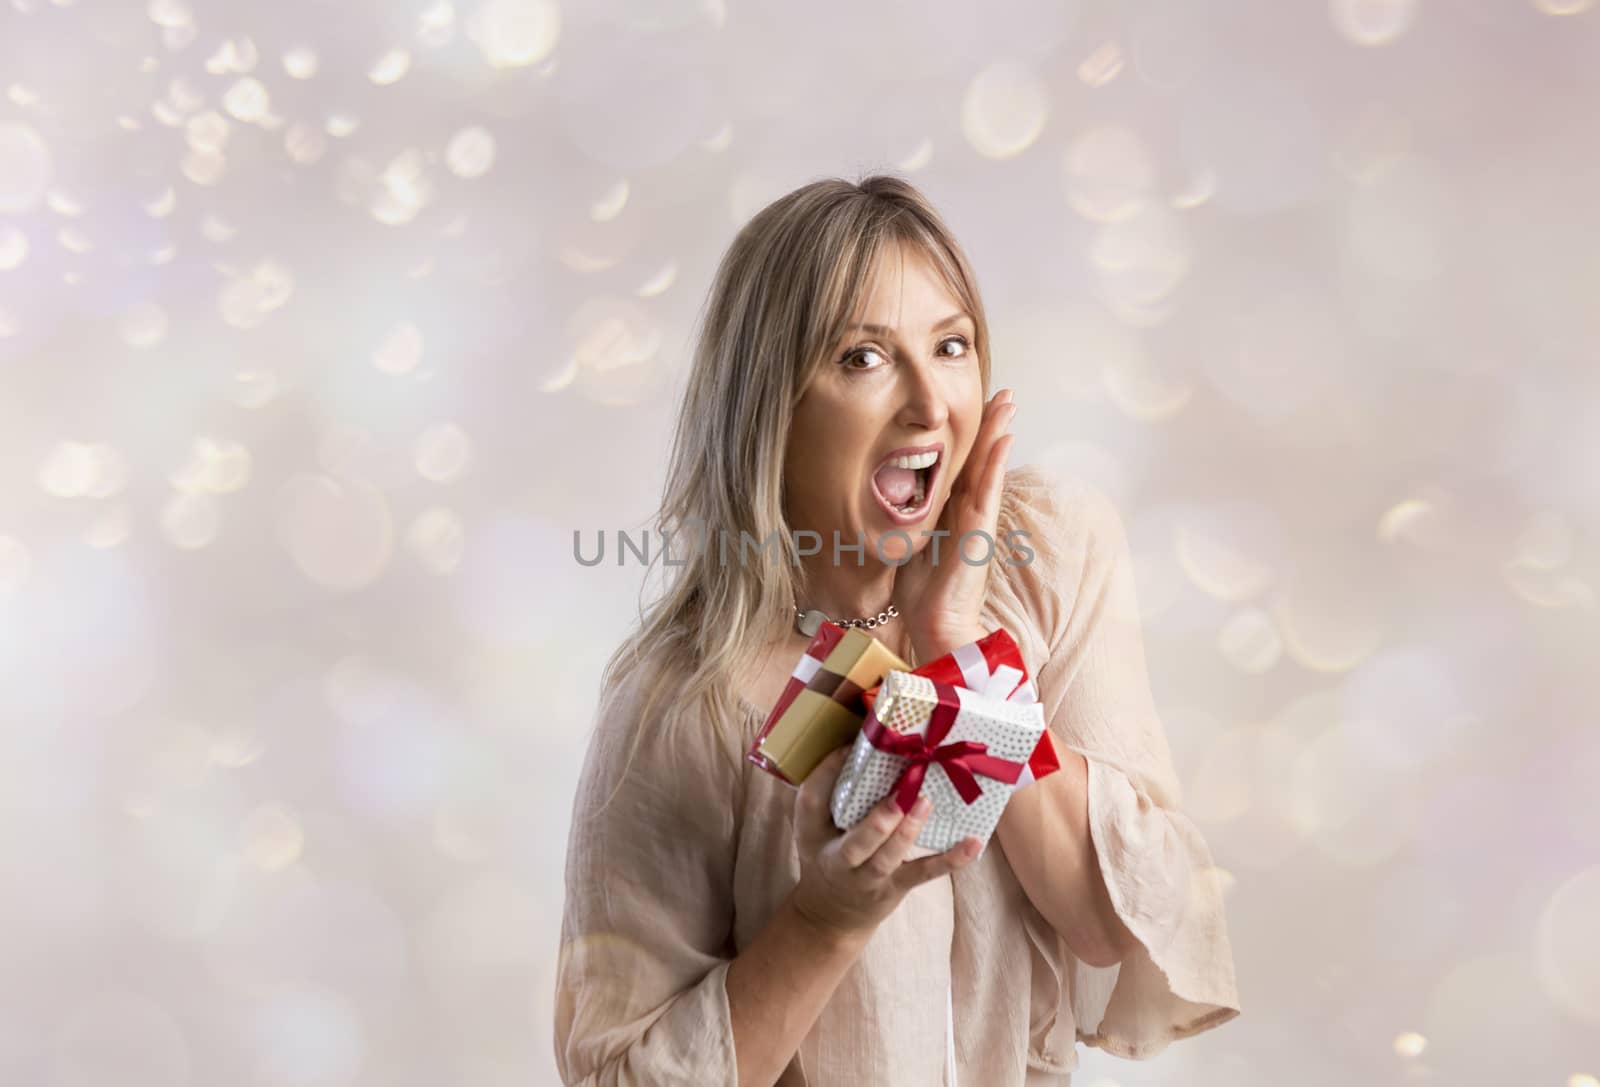 Surprised woman holding three wrapped Christmas presents tied up with ribbon.